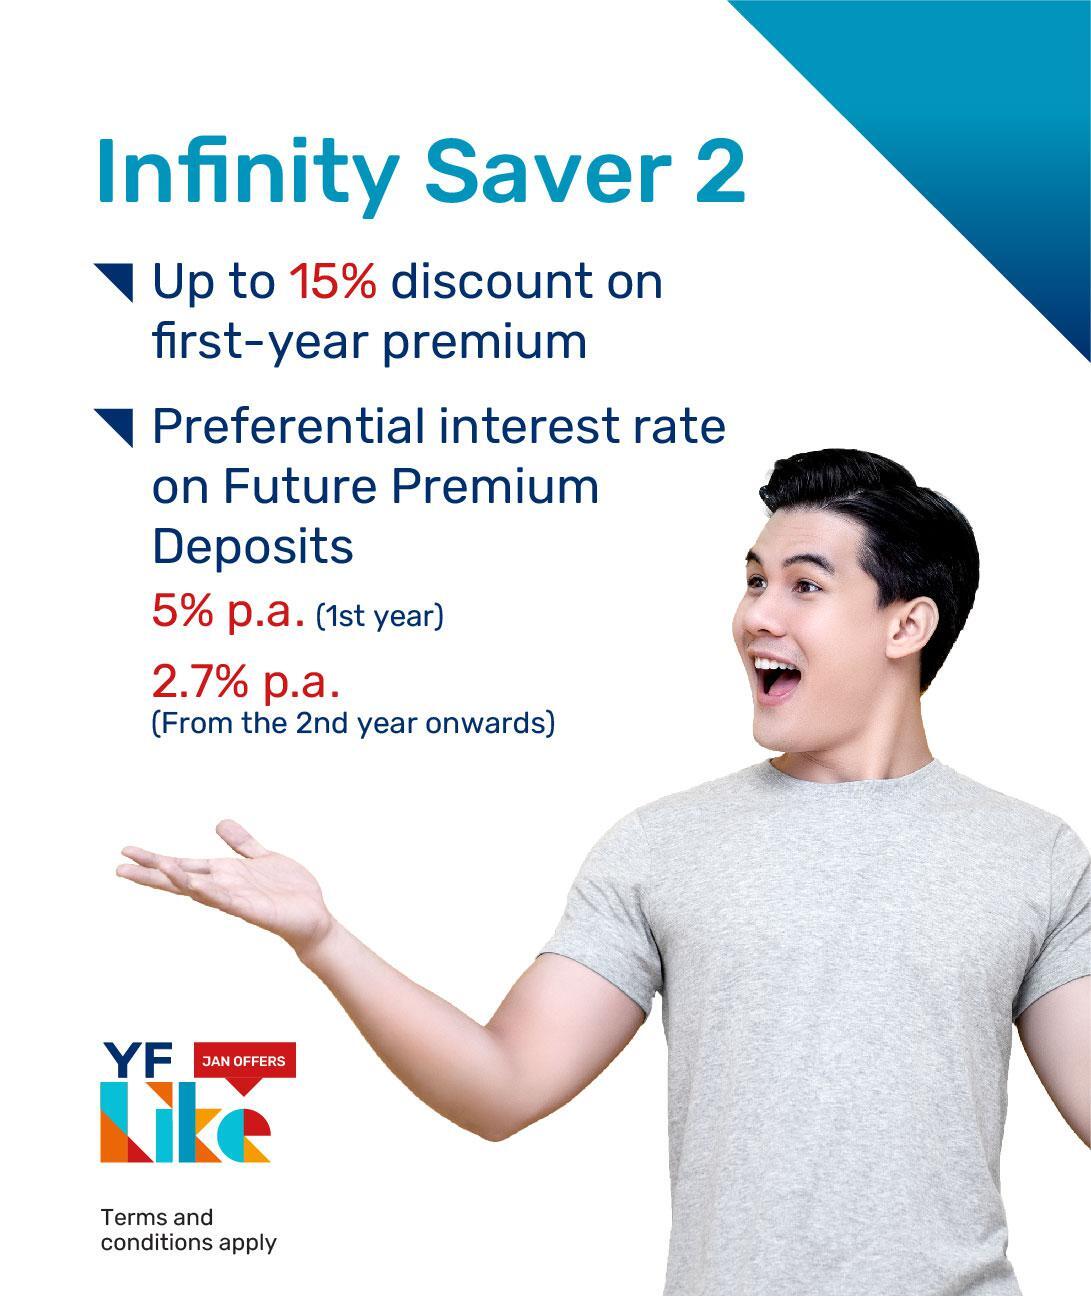 YF Life launches the “Infinity Saver 2” Dual Offers, including up to 15% discount on first-year premium and preferential interest rate on future premium deposits of 5% p.a. for the first year.